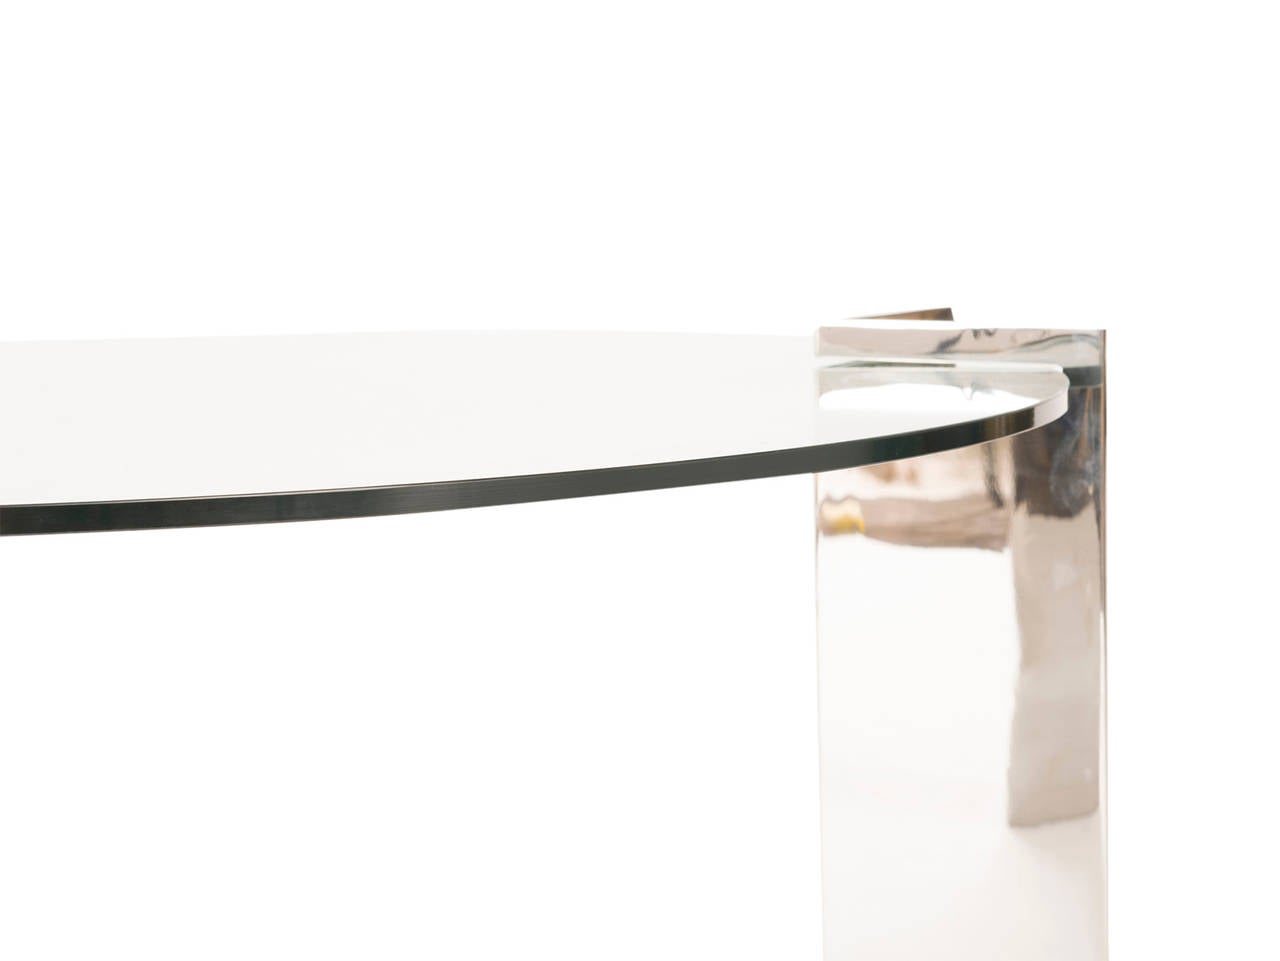 Polished mirrored stainless steel legs with smoked glass inset top.